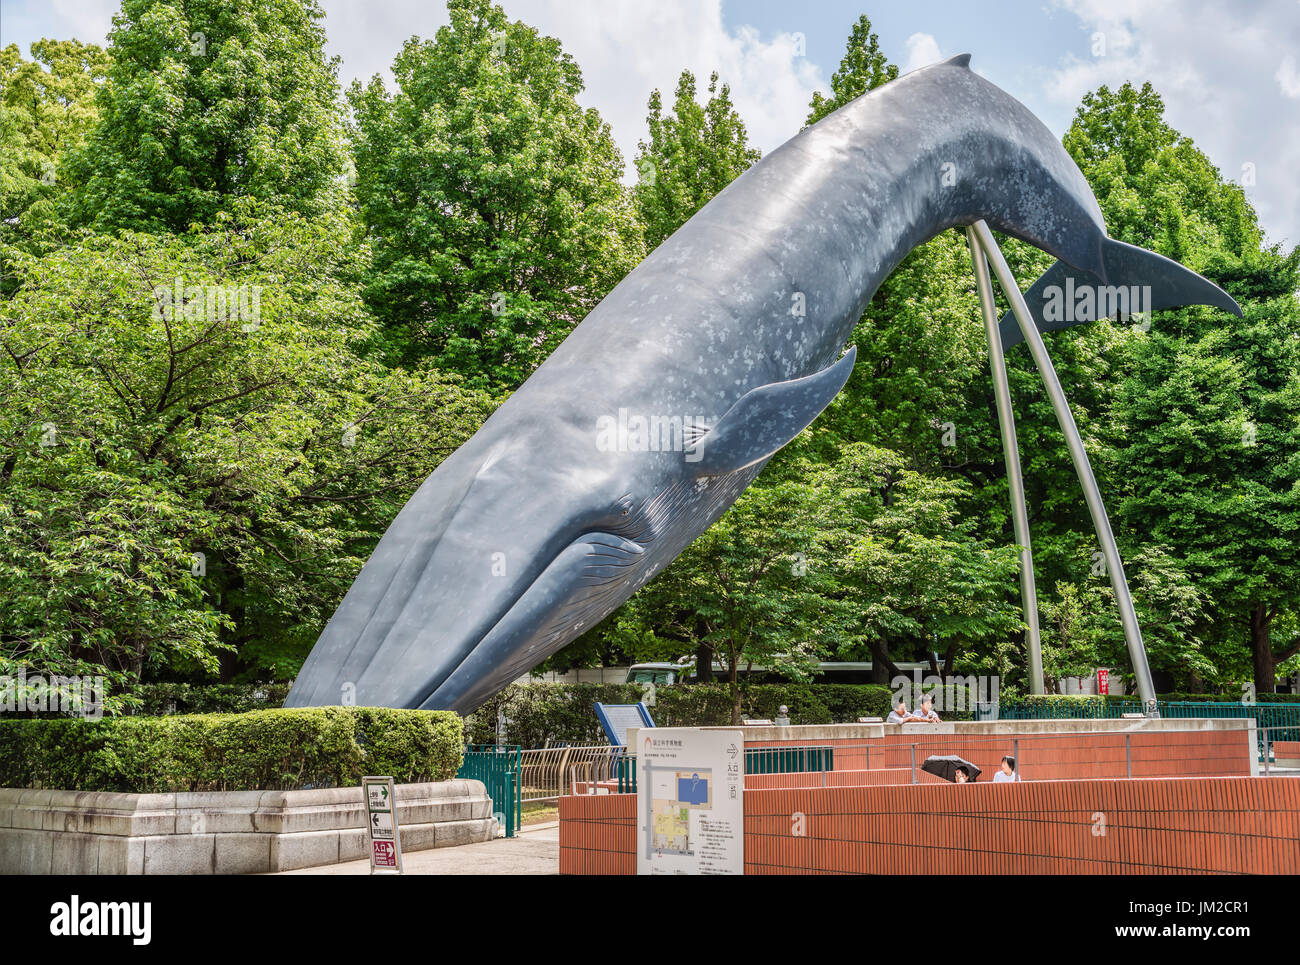 Whale sculture in front of National Museum of Nature and Science at Ueno Park, Tokyo, Japan Stock Photo